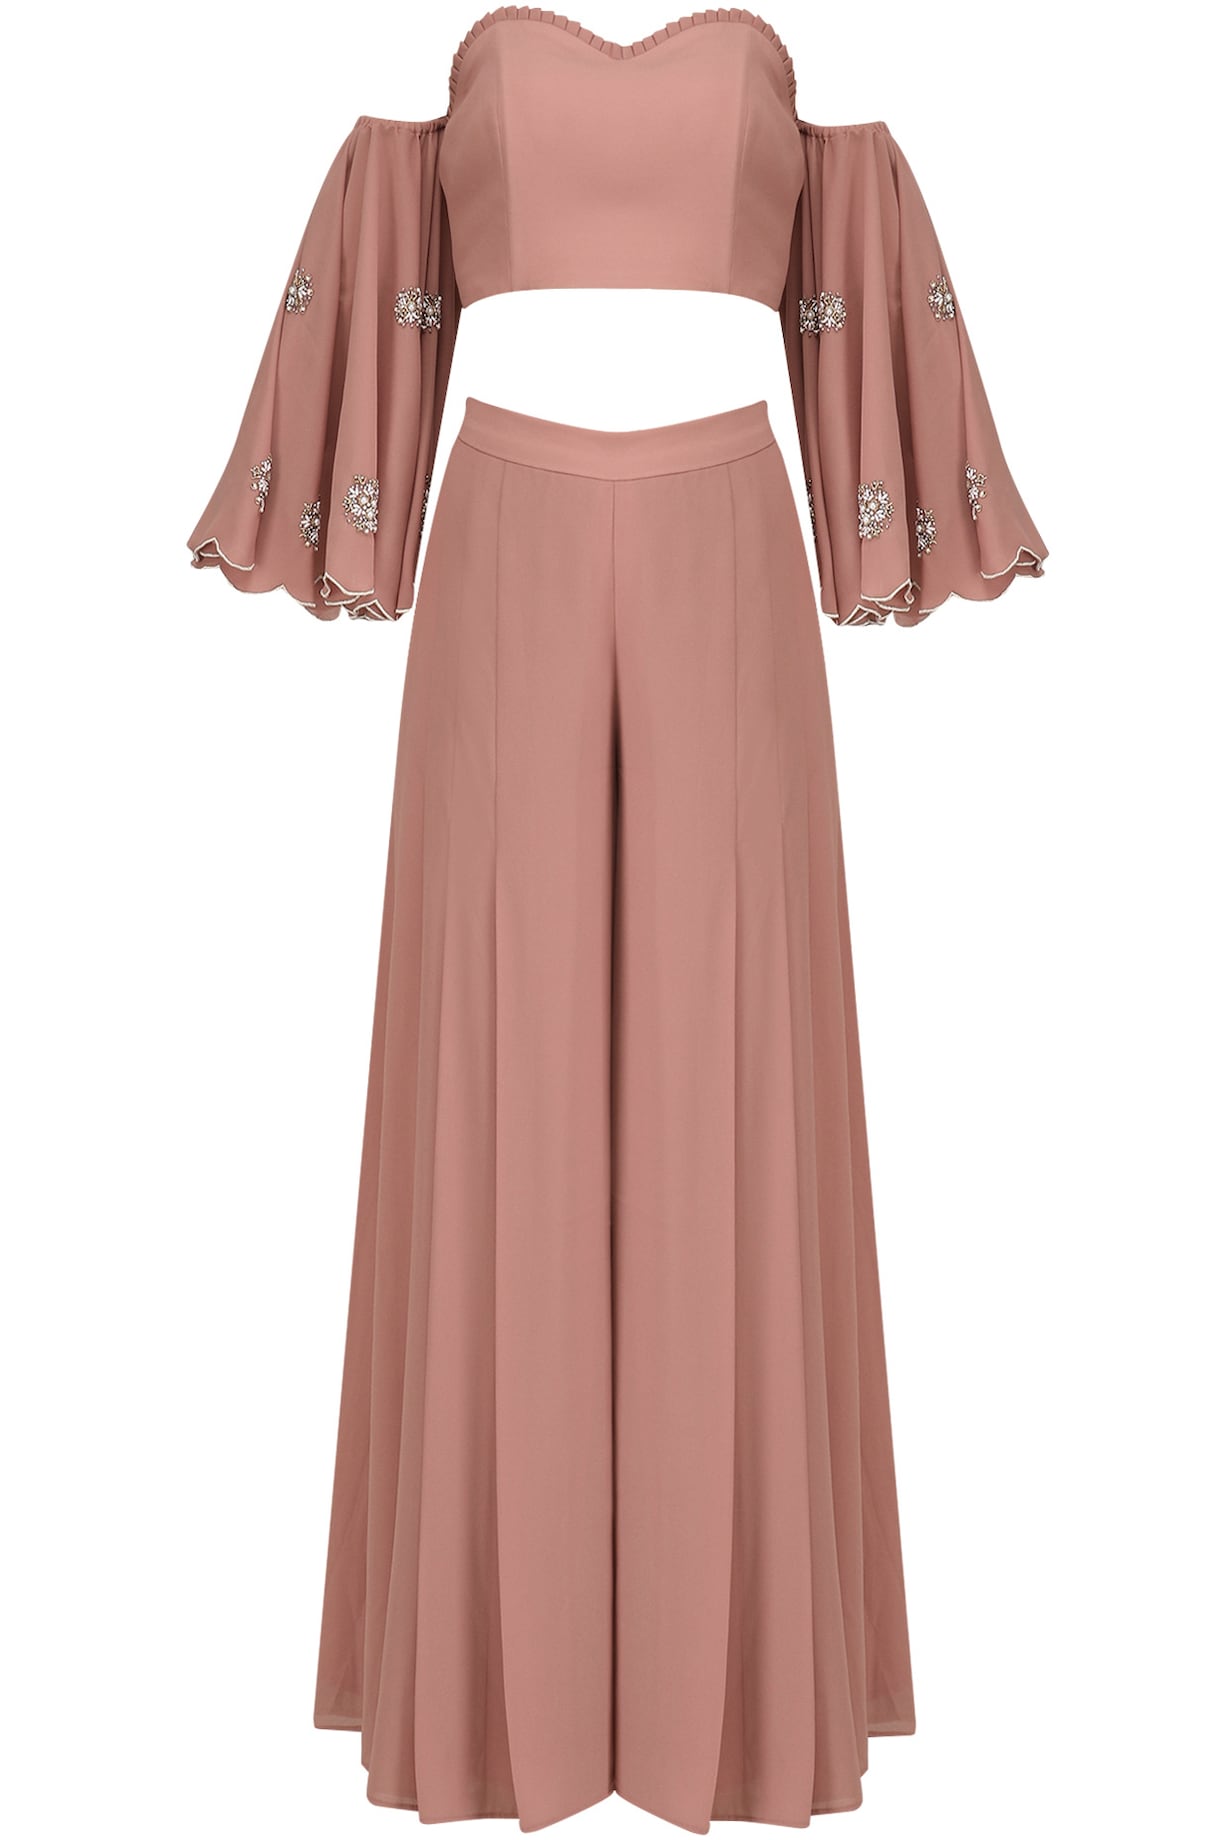 Blush pink off shoulder embroidered crop top and palazzo pants set